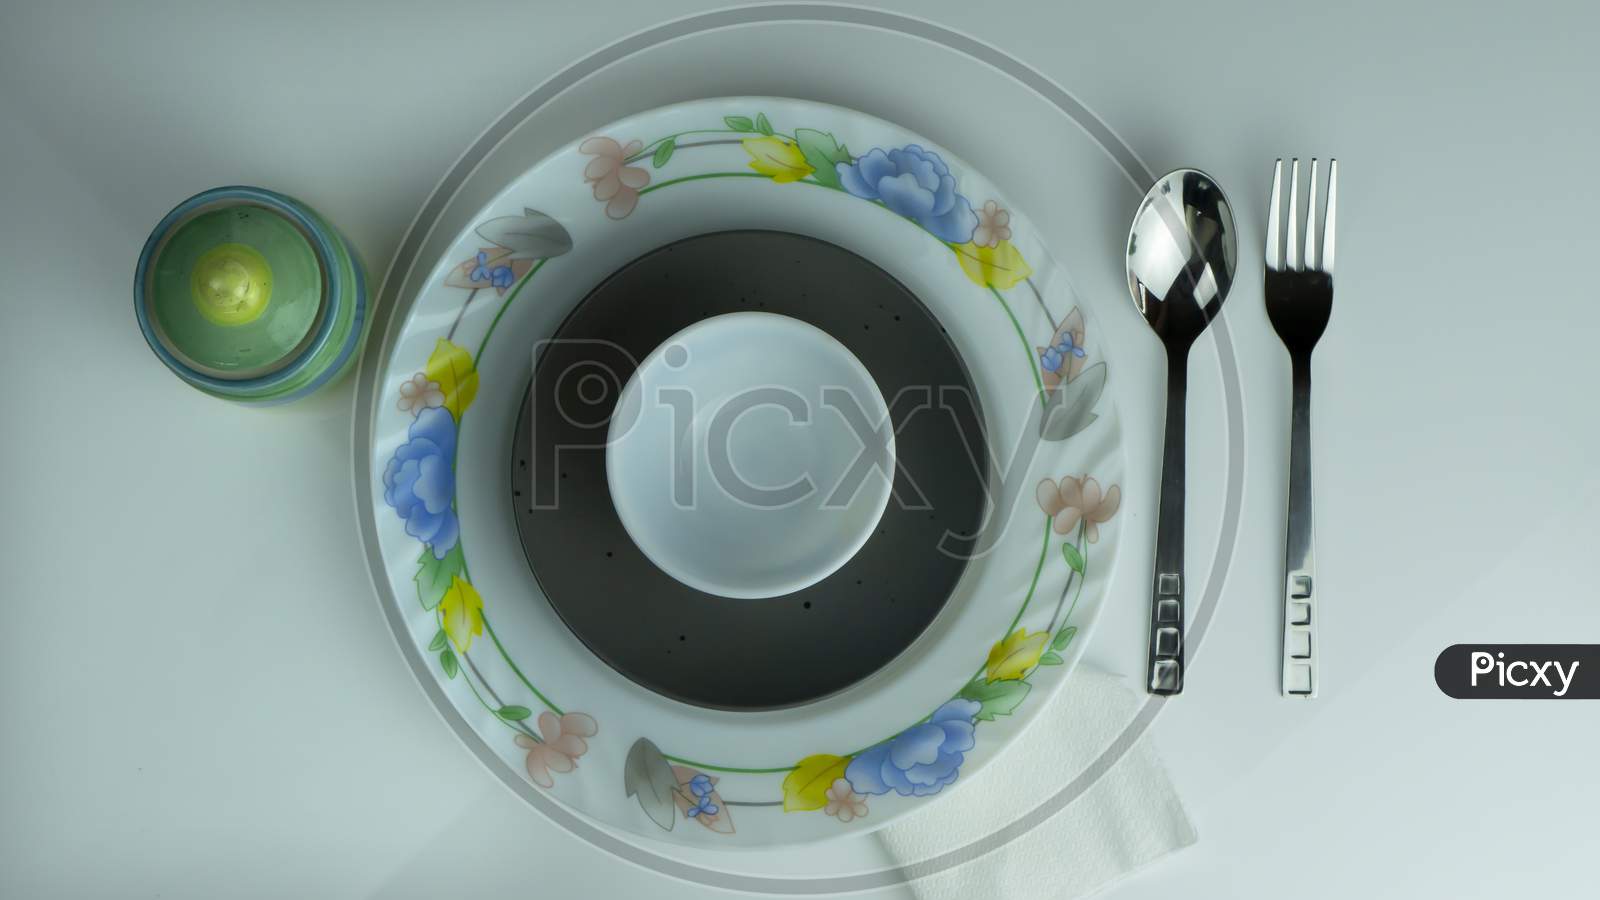 Top view of dinner plate with utensils on white background